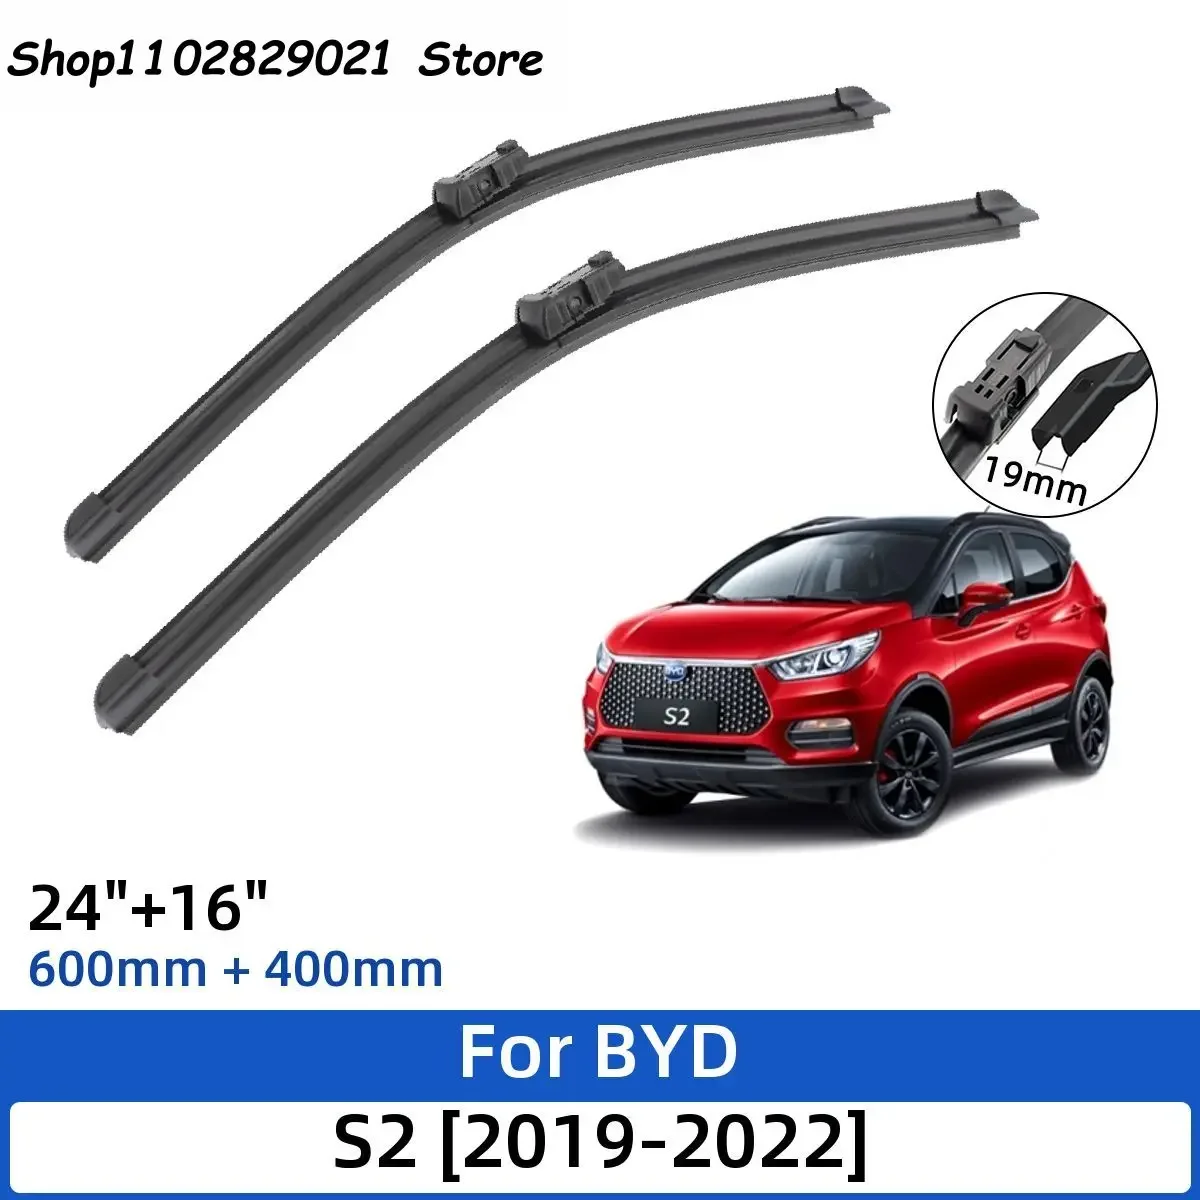 

2PCS For BYD S2 2019-2022 24"+16" Front Wiper Blades Windshield Windscreen Window Cutter Accessories 2019 2020 2021 2022